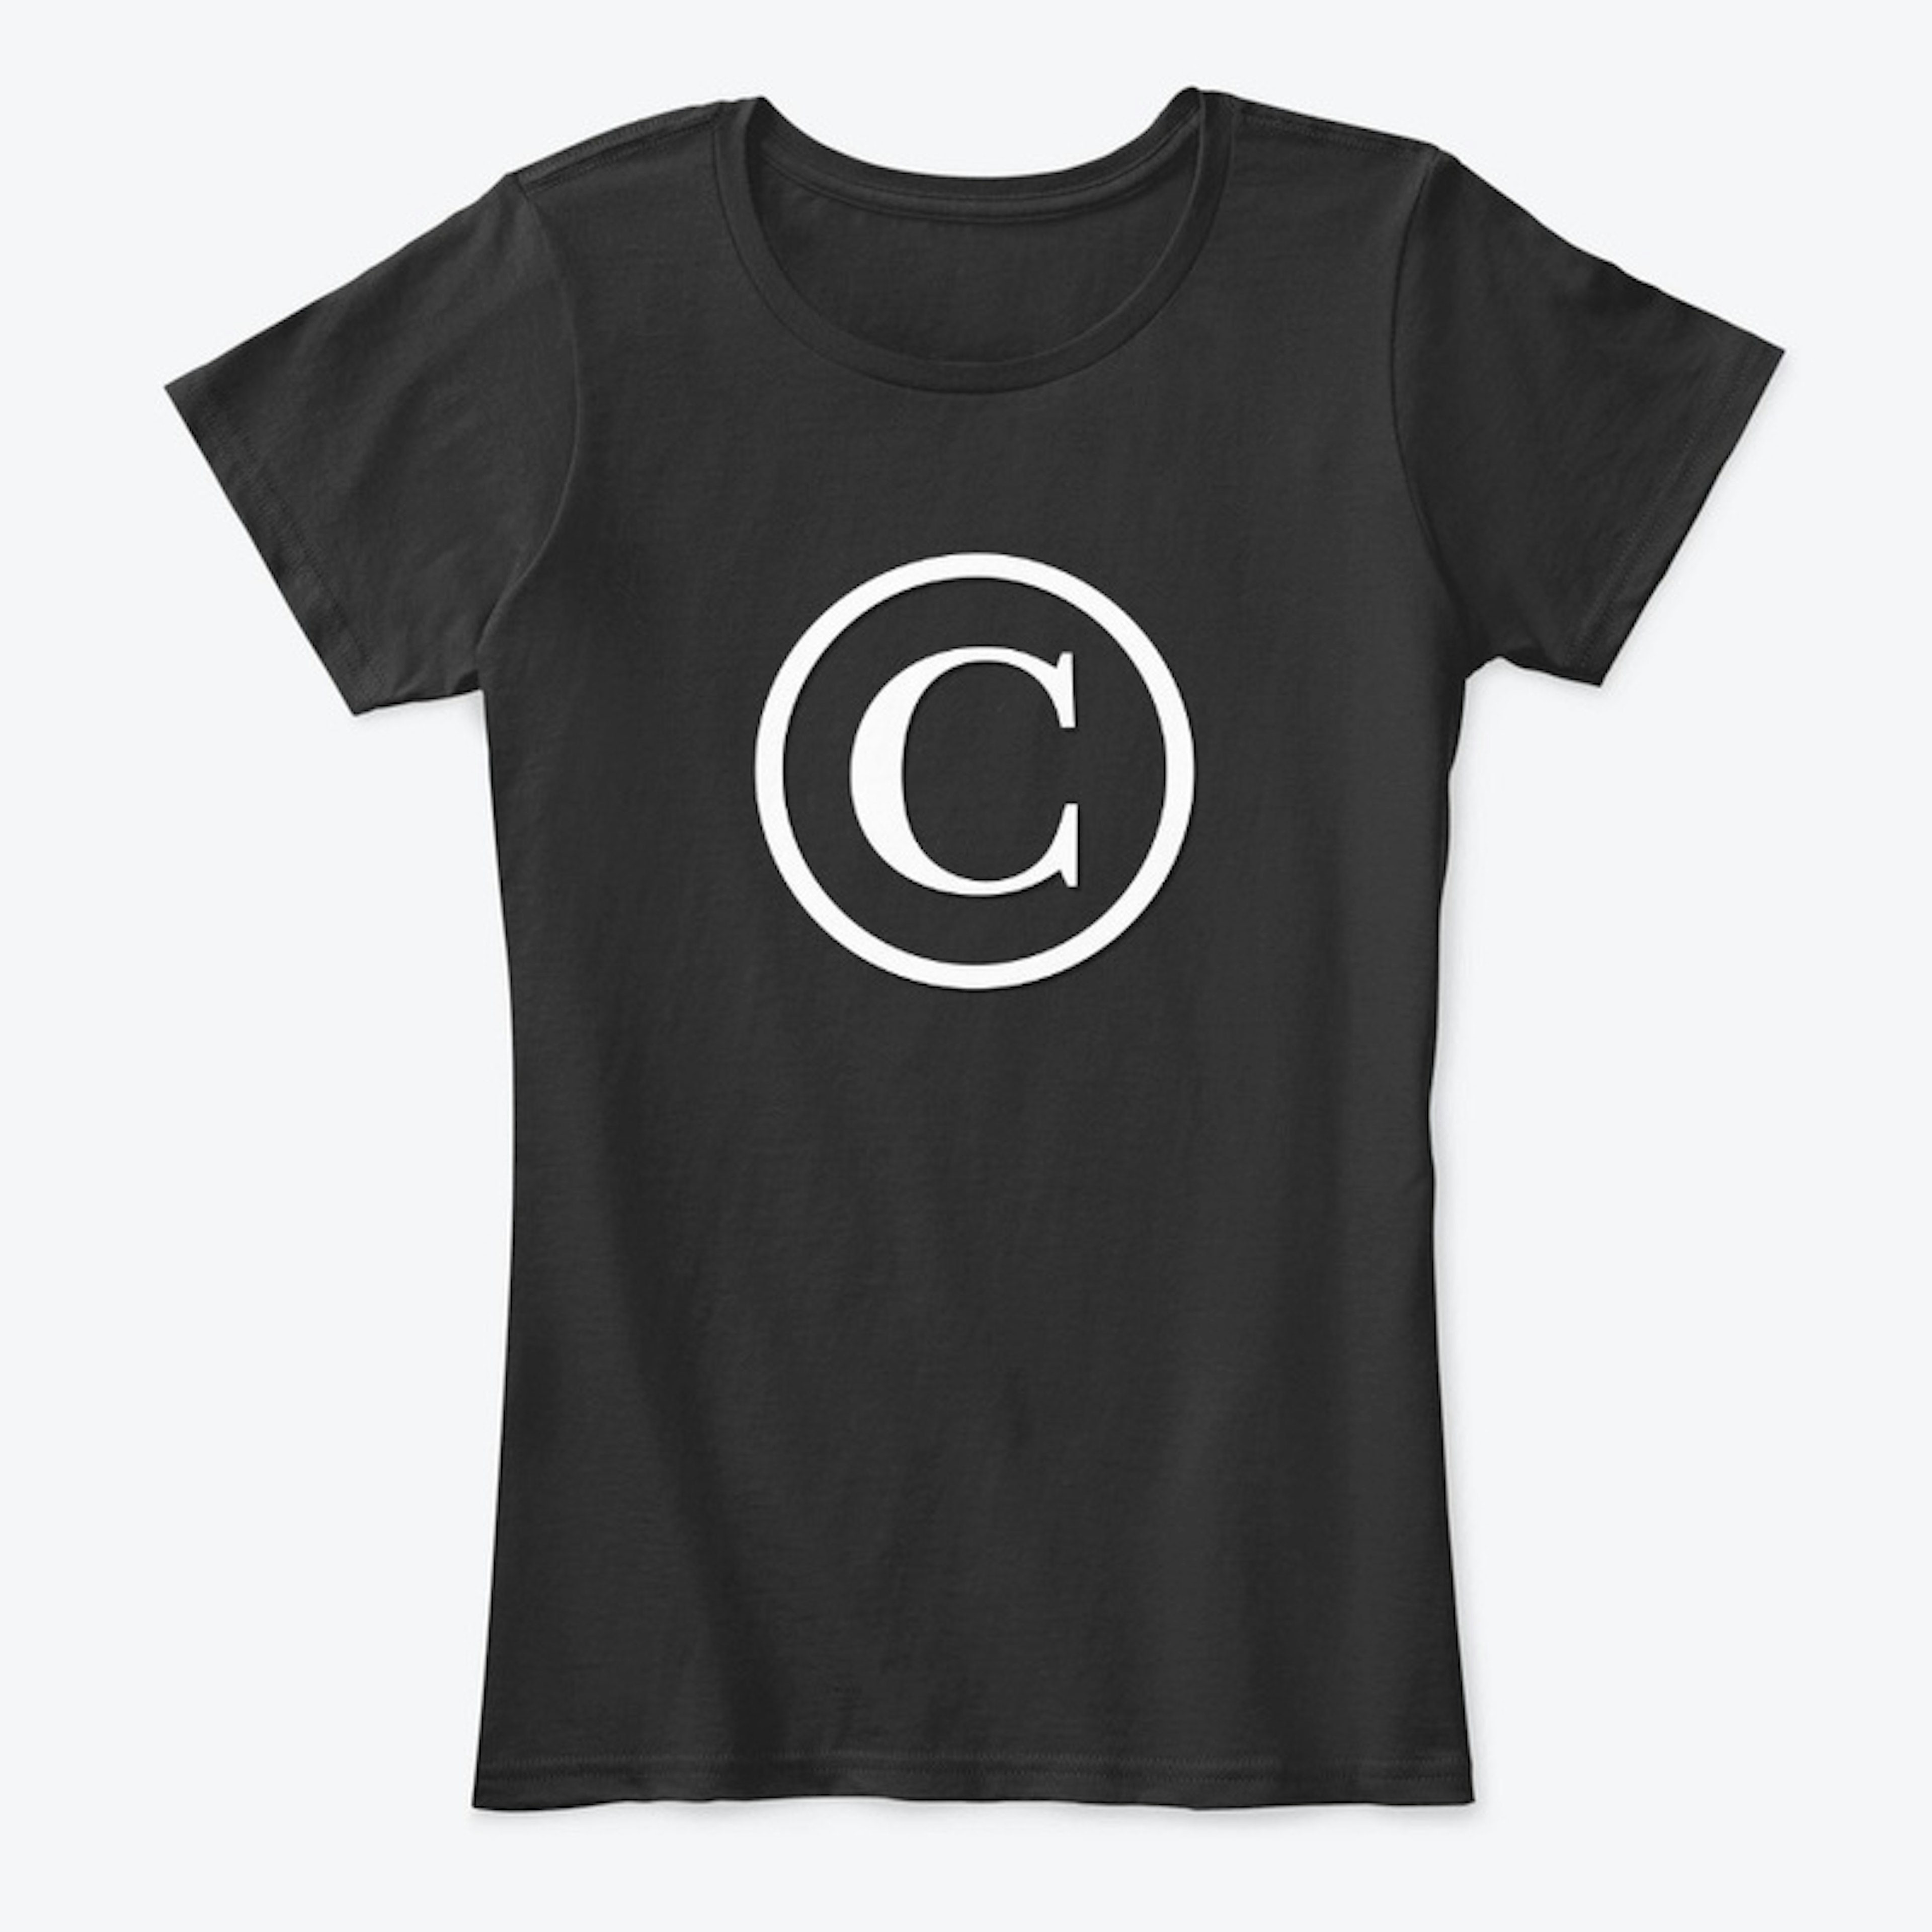 Copyright or not... great for writers